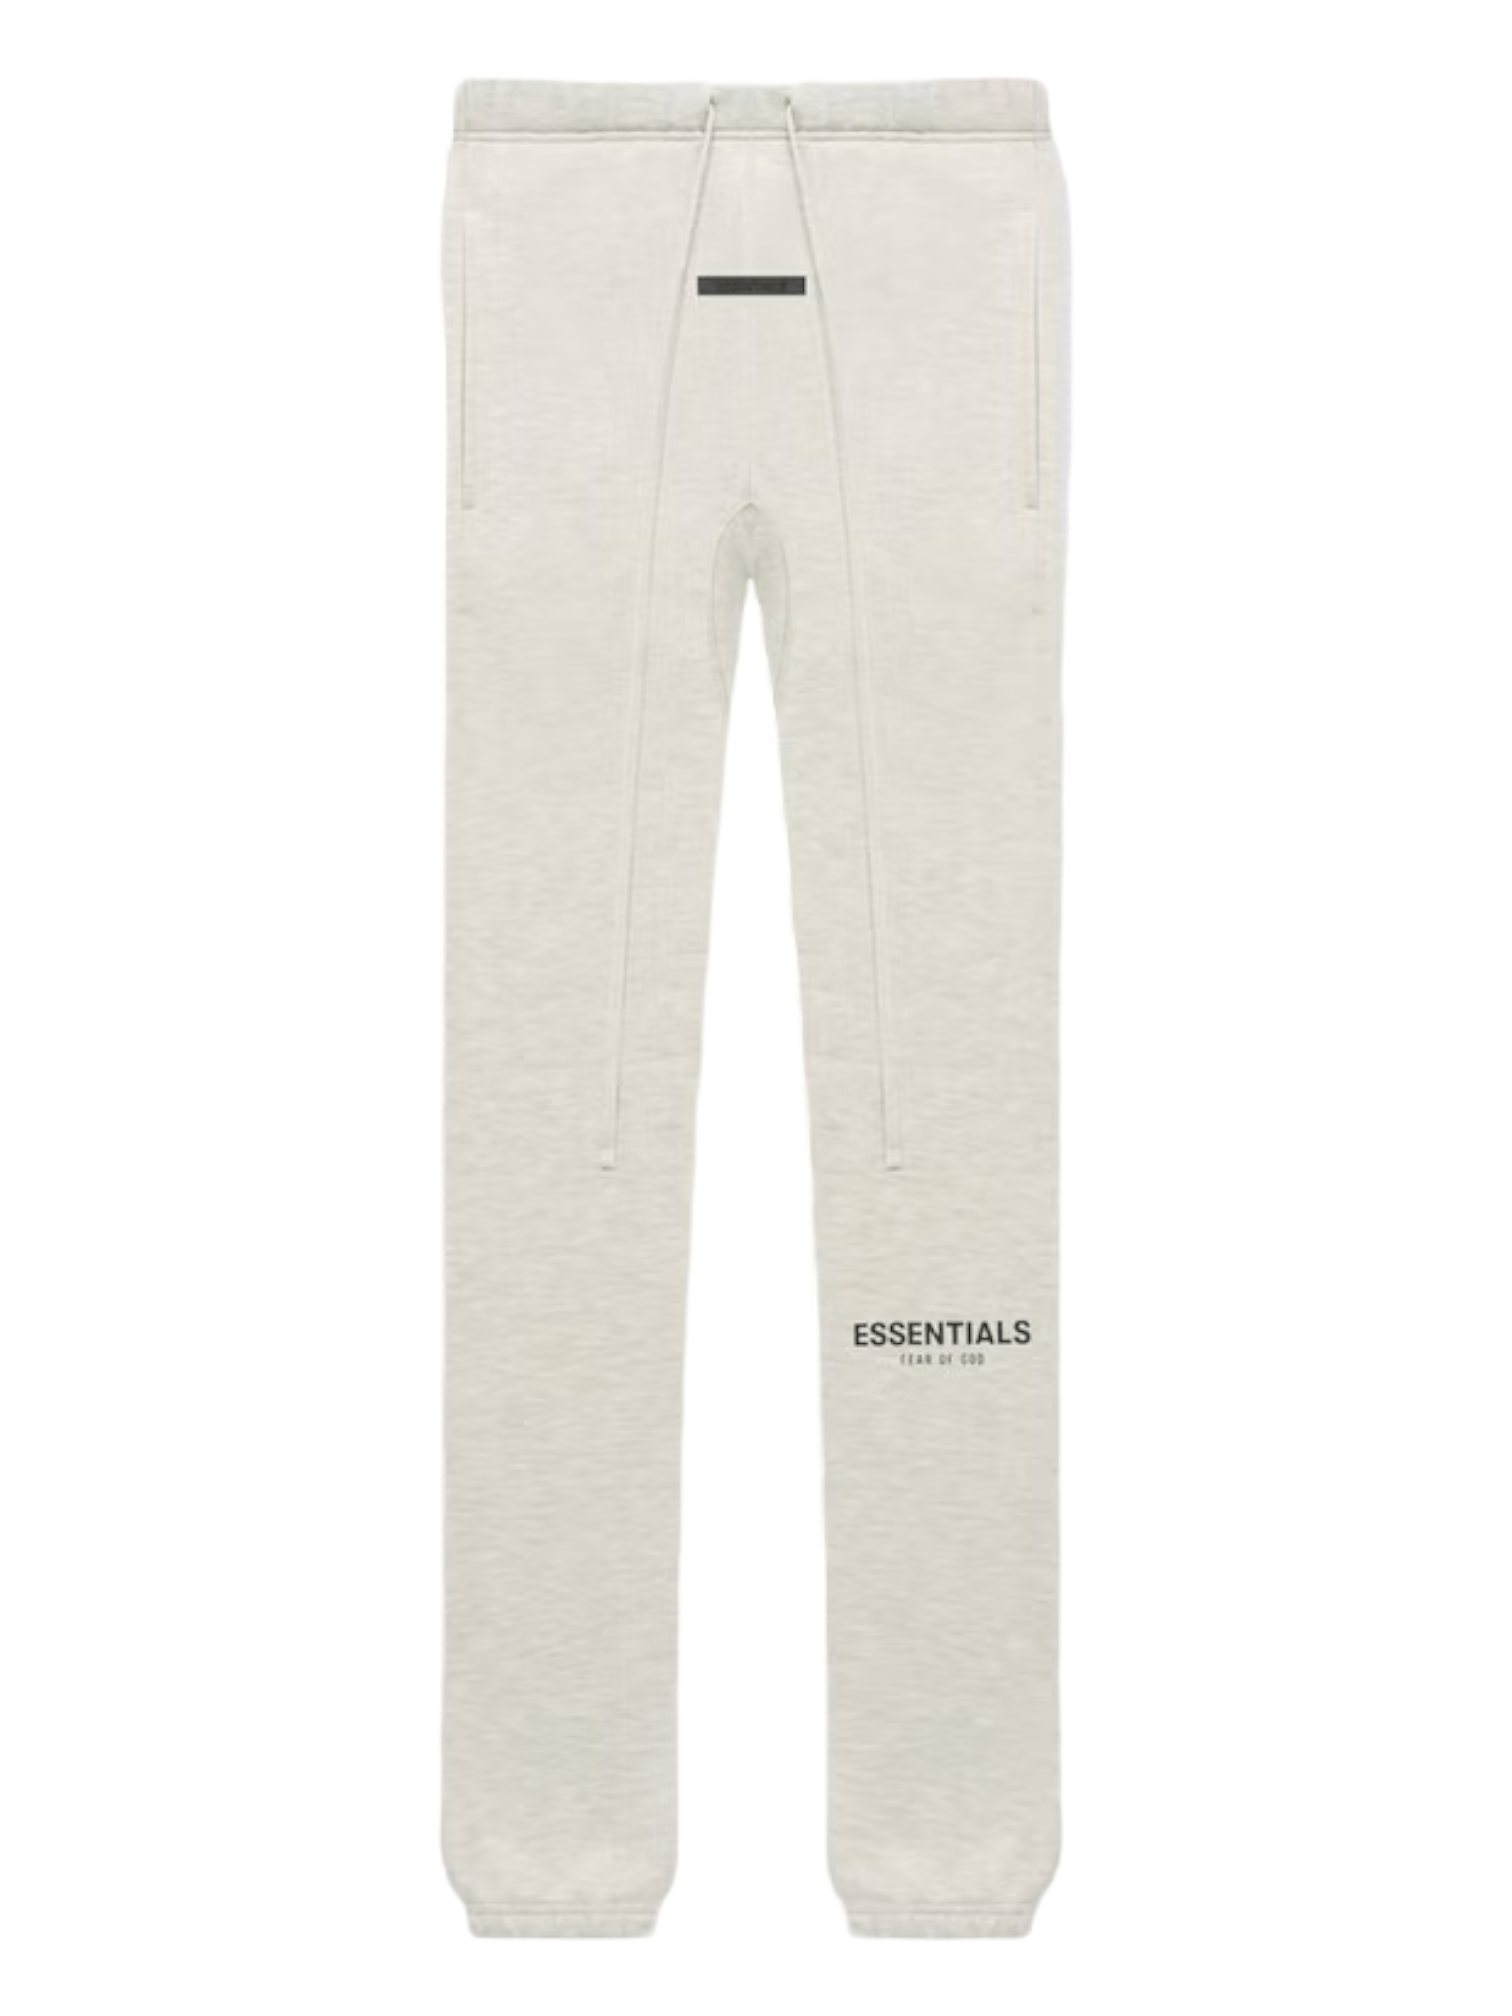 Essentials Fear of God Light Heather Oatmeal Sweatpants Core Collection FW21 - Genuine Design Luxury Consignment for Men. New & Pre-Owned Clothing, Shoes, & Accessories. Calgary, Canada